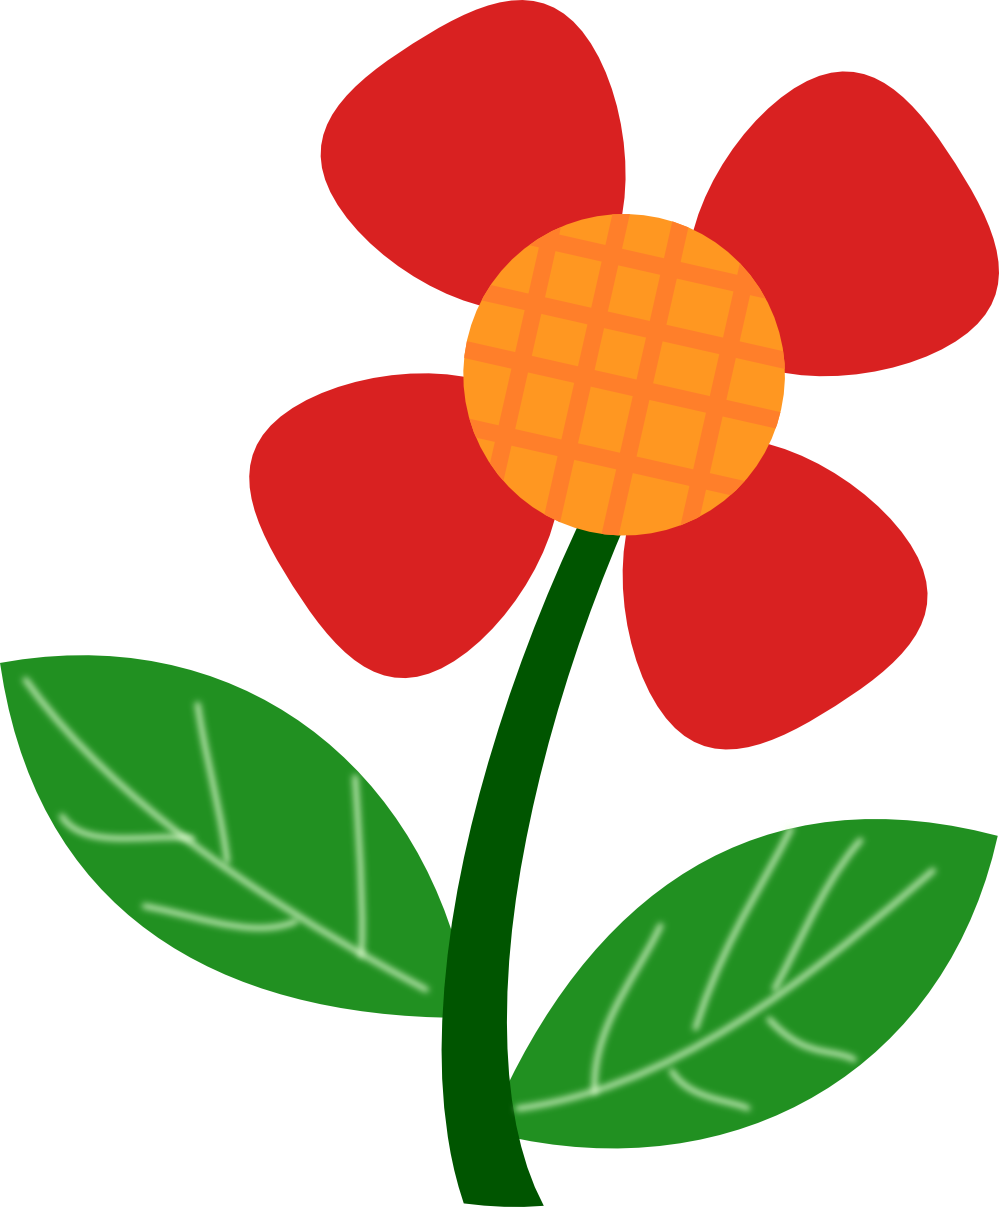 Flowers clipart no background